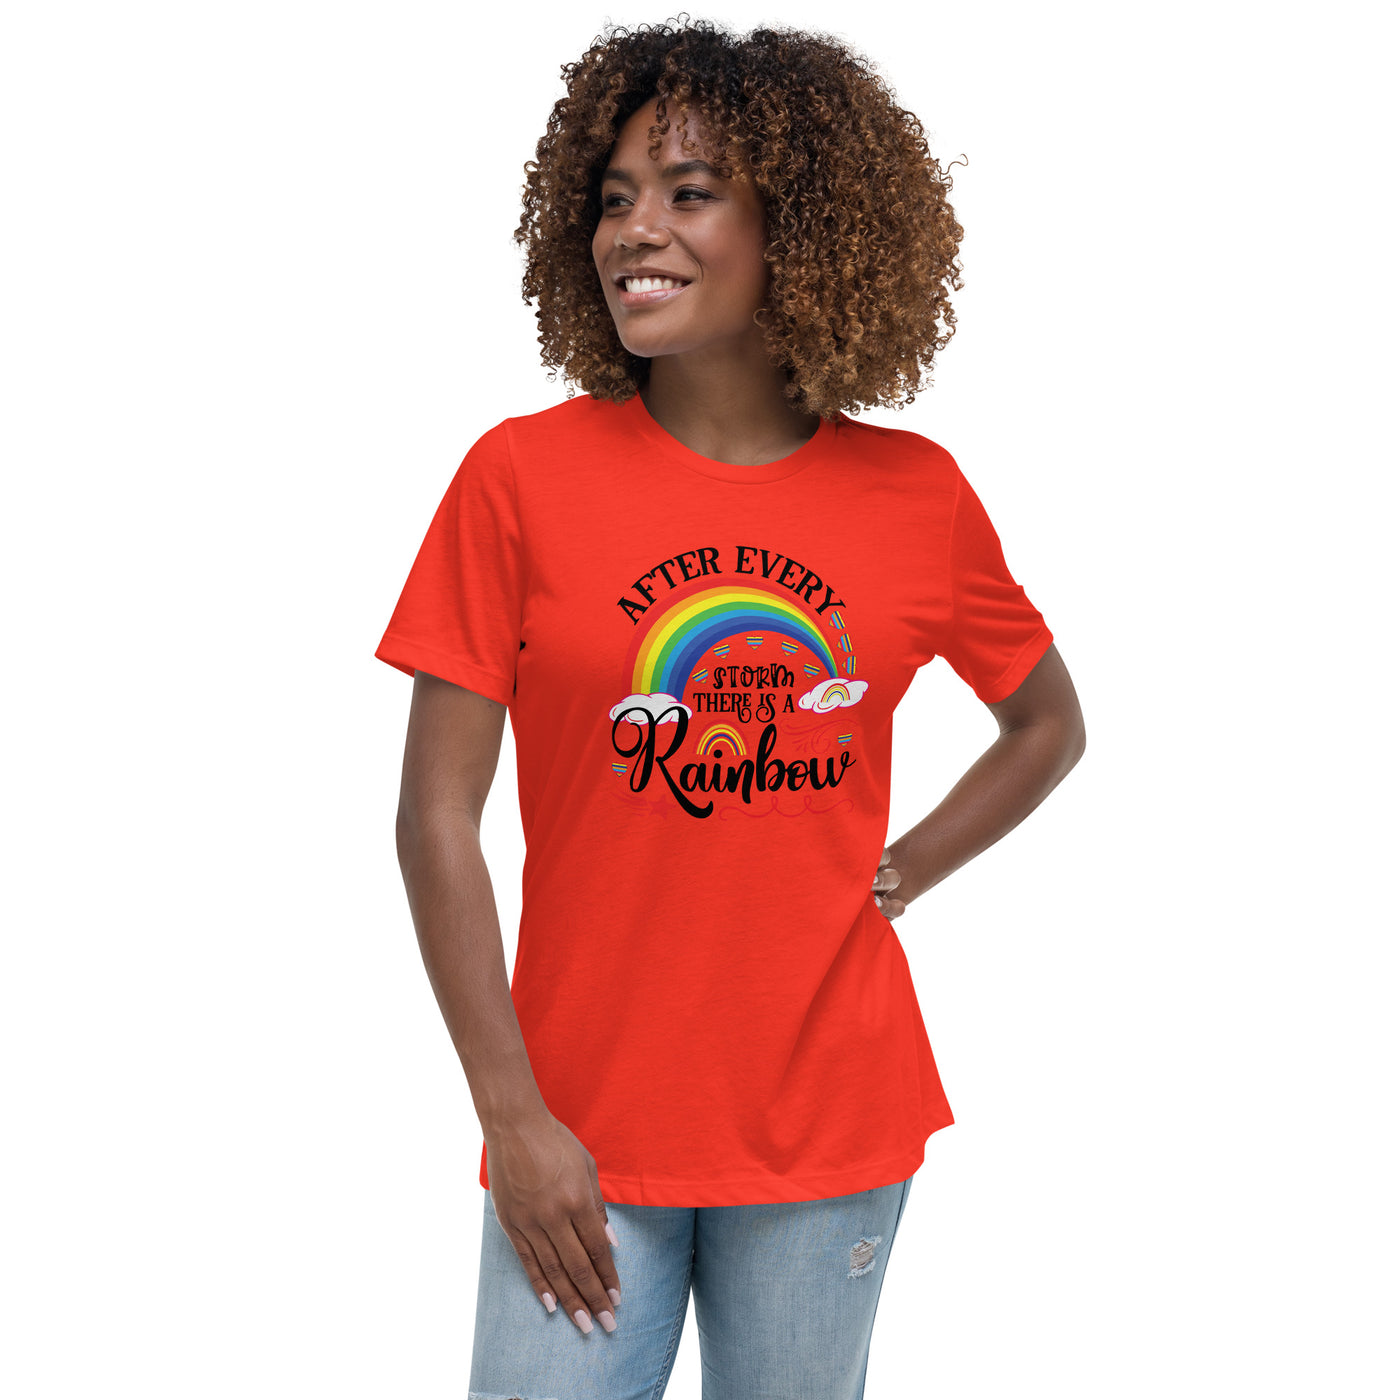 "After Every Storm Is A Rainbow" Women's Relaxed T-Shirt